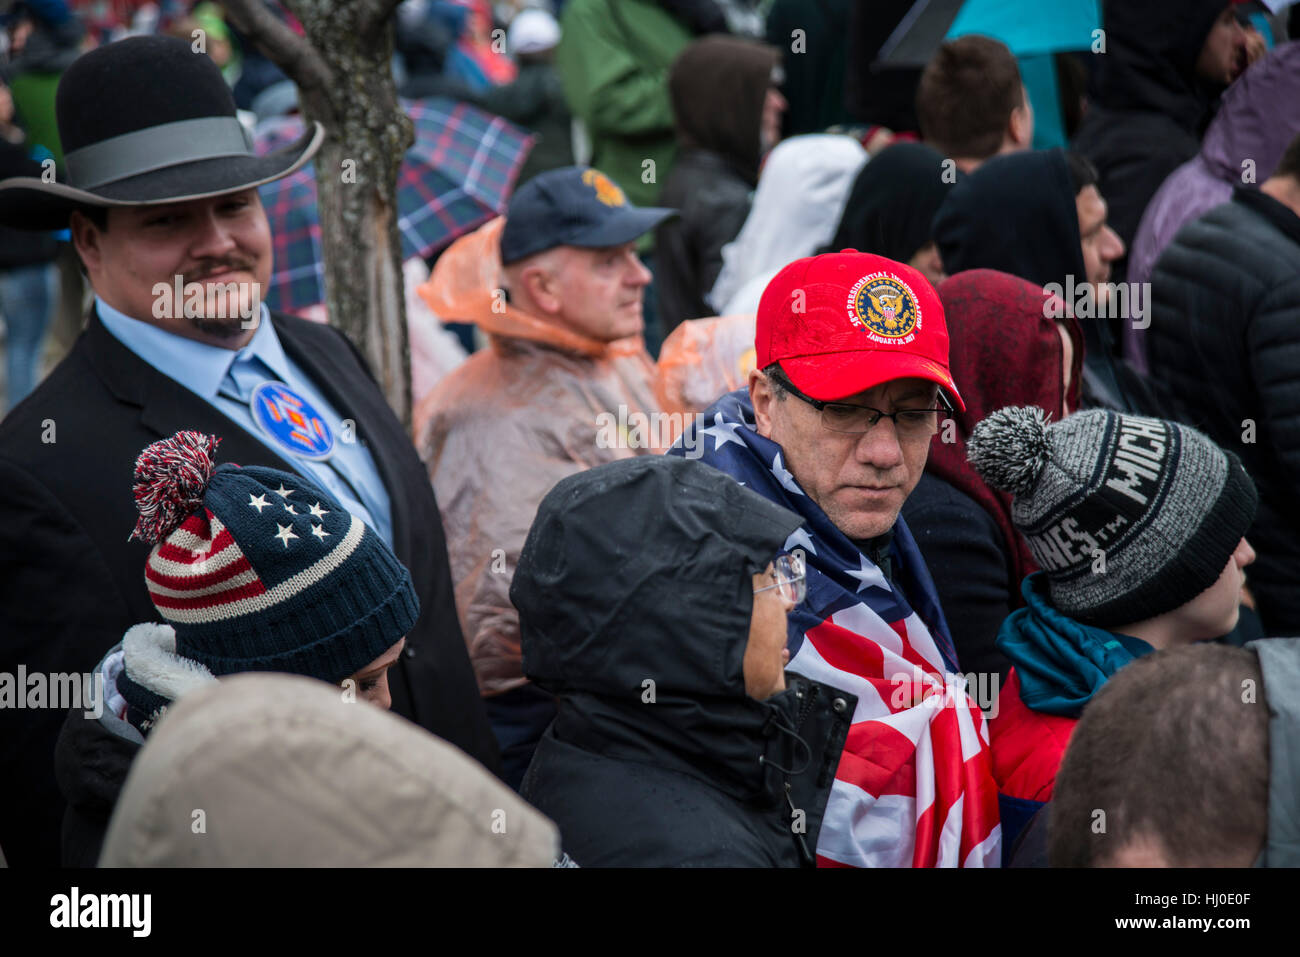 Non-white Donald Trump supporter Native American gentleman all the way from Montana, in large crowd of people awaiting beginning of Inaugural parade along Pennsylvania Ave.  Trump became the 45th President of the United States. January 20, 2017 in Washington, DC Stock Photo